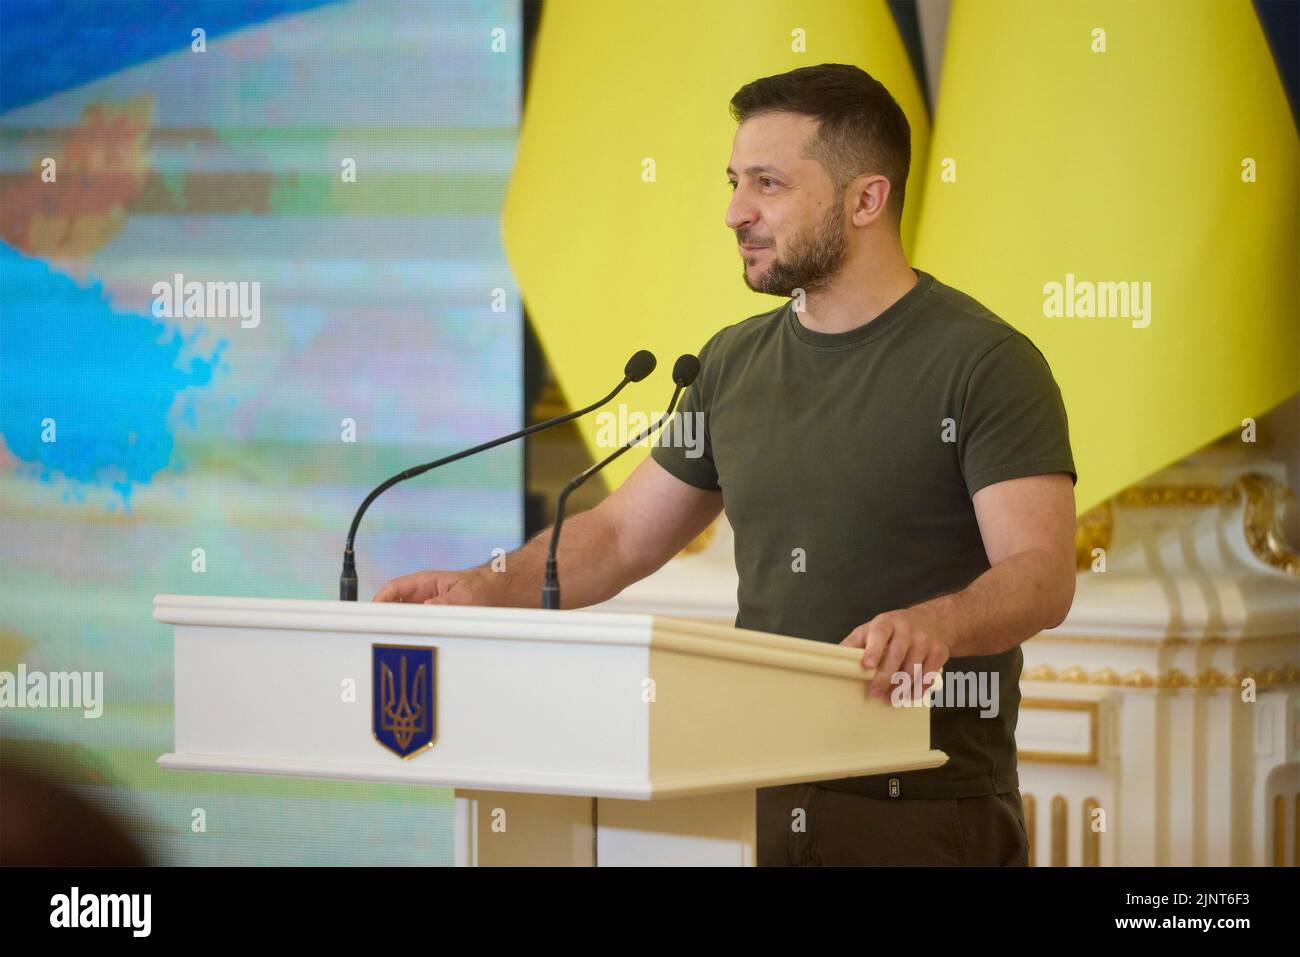 Kyiv, Ukraine. 12th Aug, 2022. Ukrainian President Volodymyr Zelenskyy, delivers remarks during an event to celebrate children rescuers and war heroes to mark International Youth Day in the White Hall of Heroes at the Mariinskyi Palace, August 12, 2022 in Kyiv, Ukraine. Credit: Sarsenov Daniiar/Ukraine Presidency/Alamy Live News Stock Photo